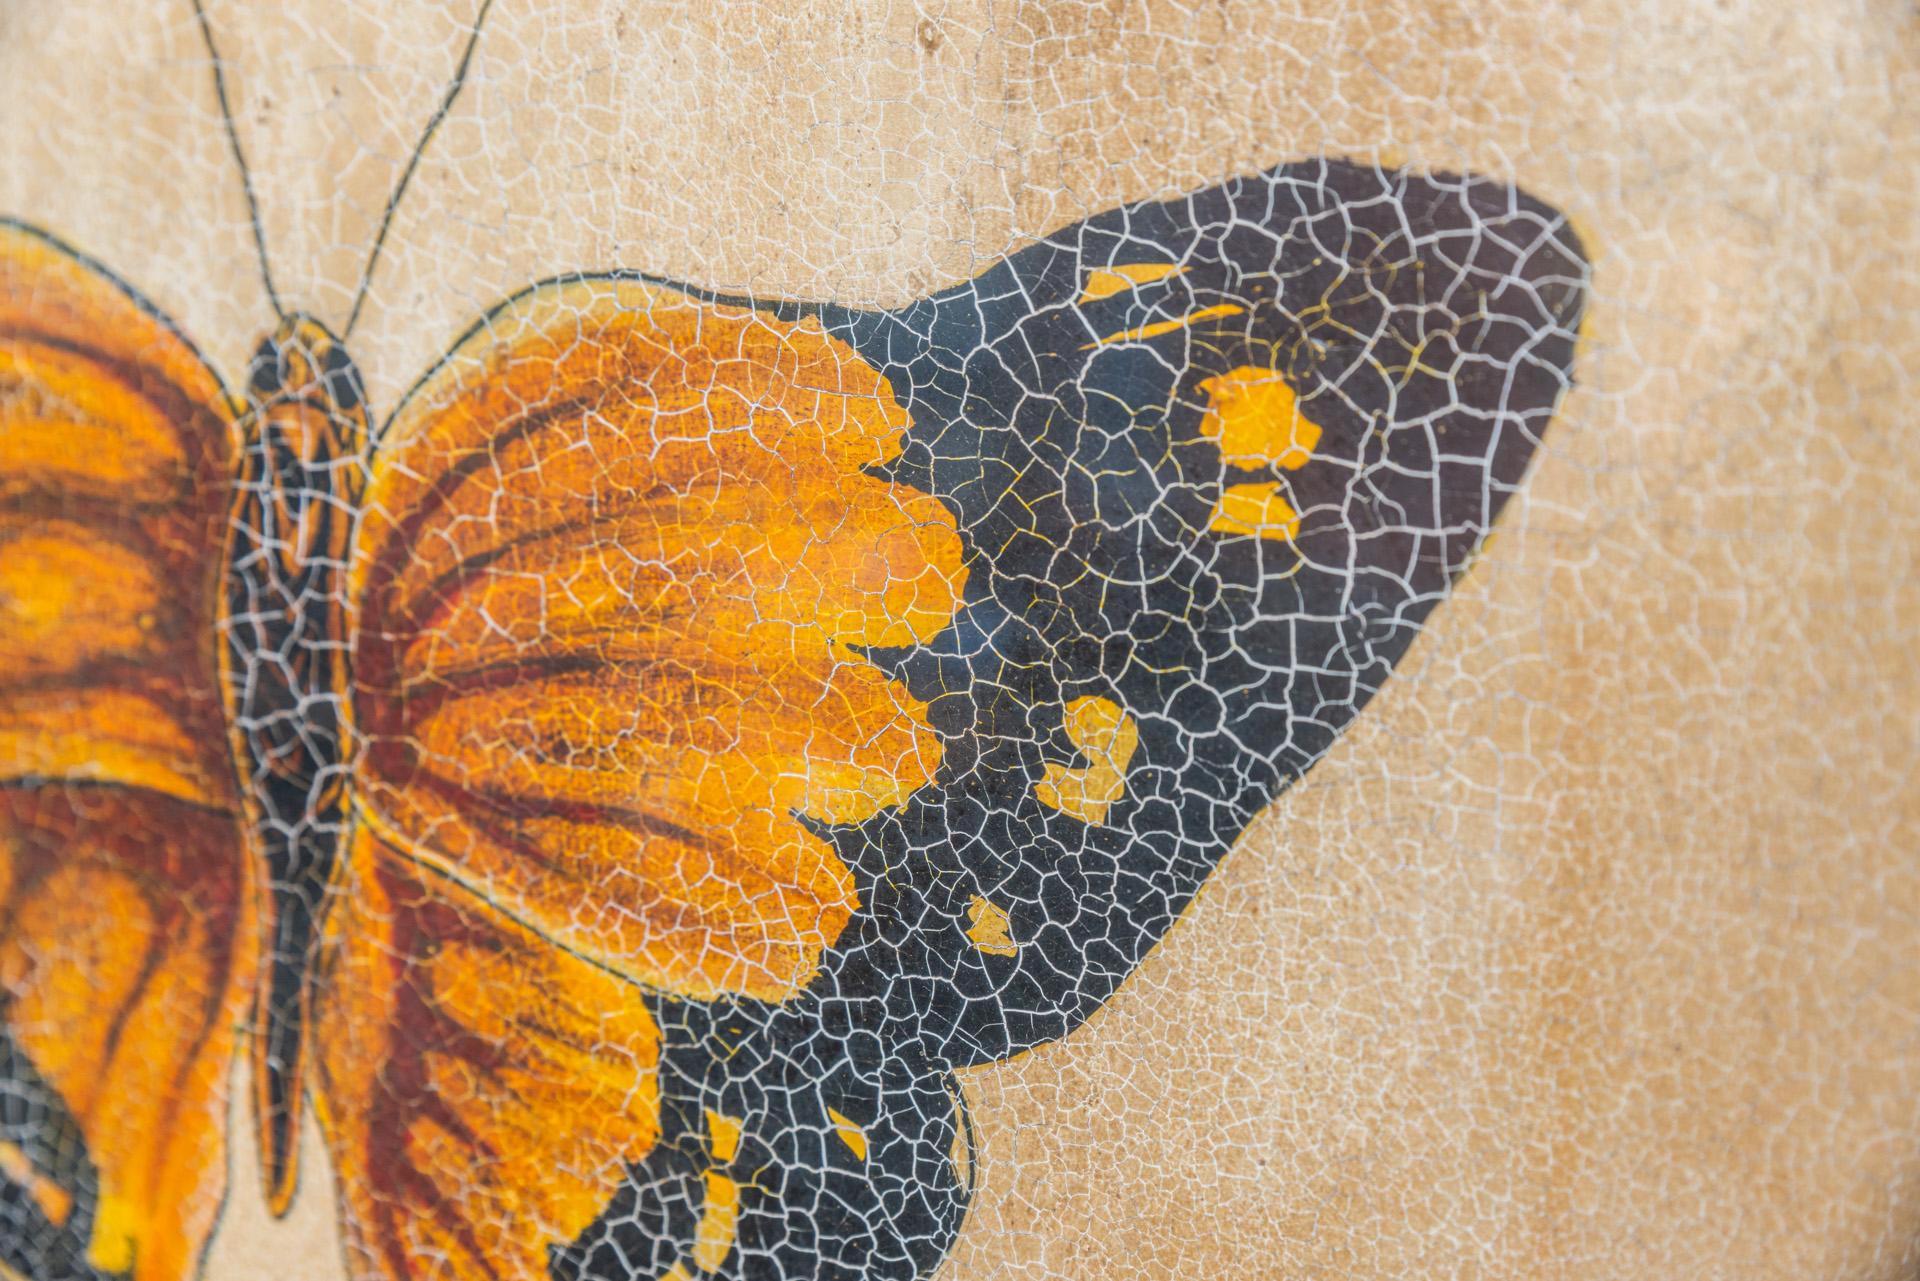 Paint Entomology, Study of Butterflies According to Nature, circa 1950, France